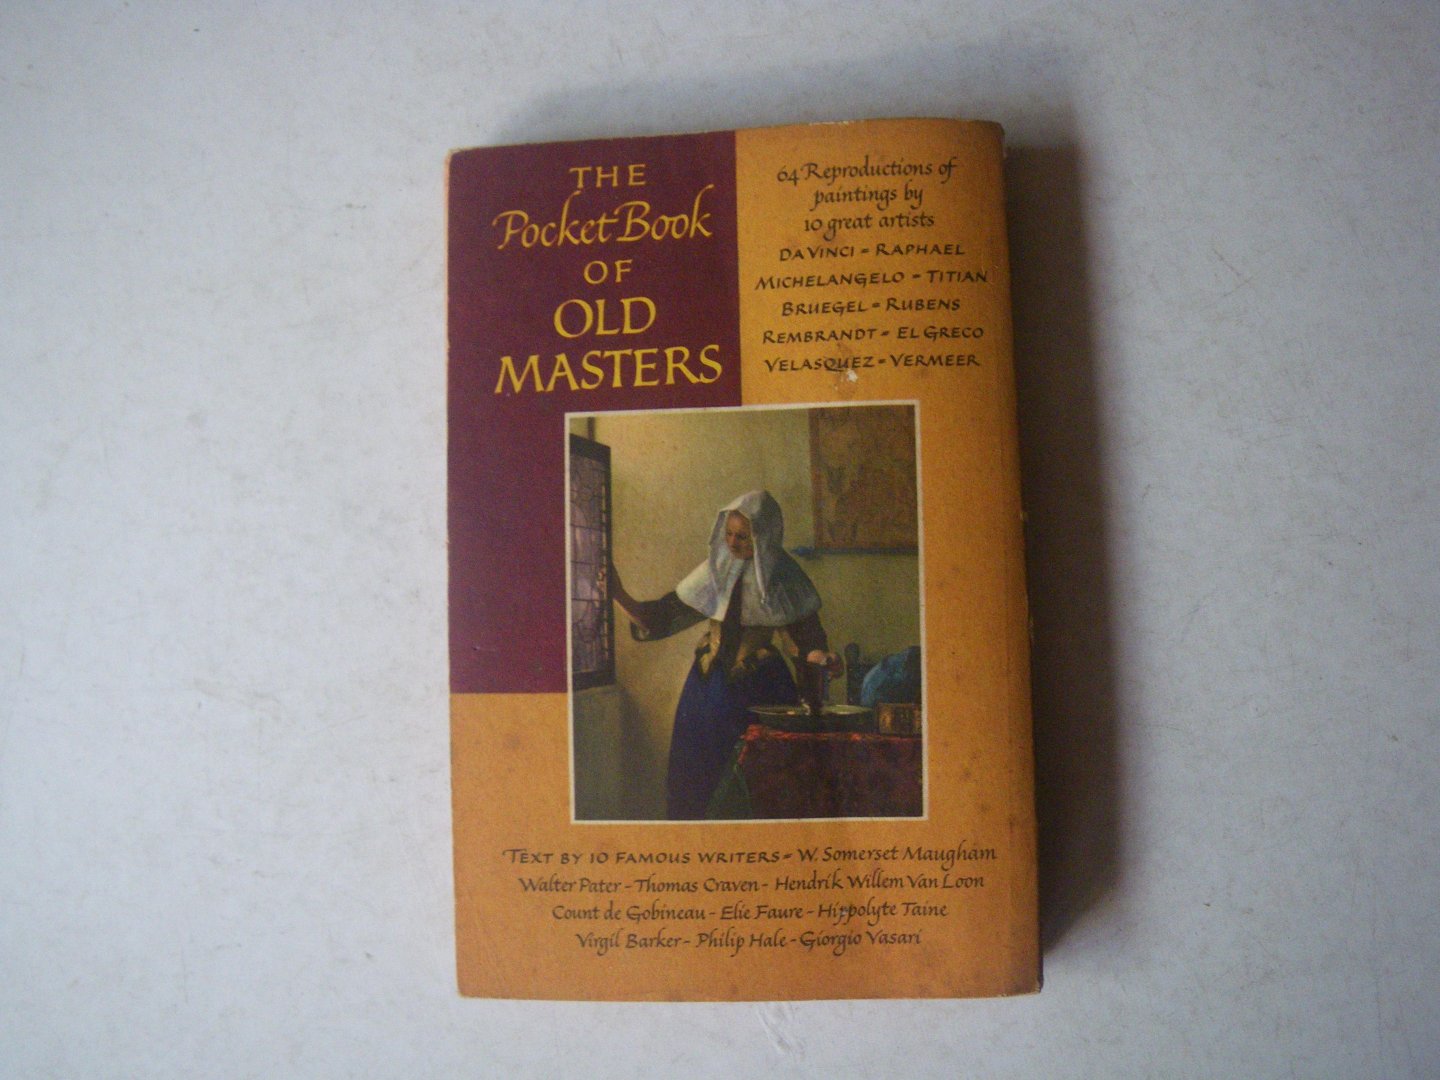 red. Wechsler, Herman - The Pocket Book of Old Masters With Sixty-Four Gravure Illustrations